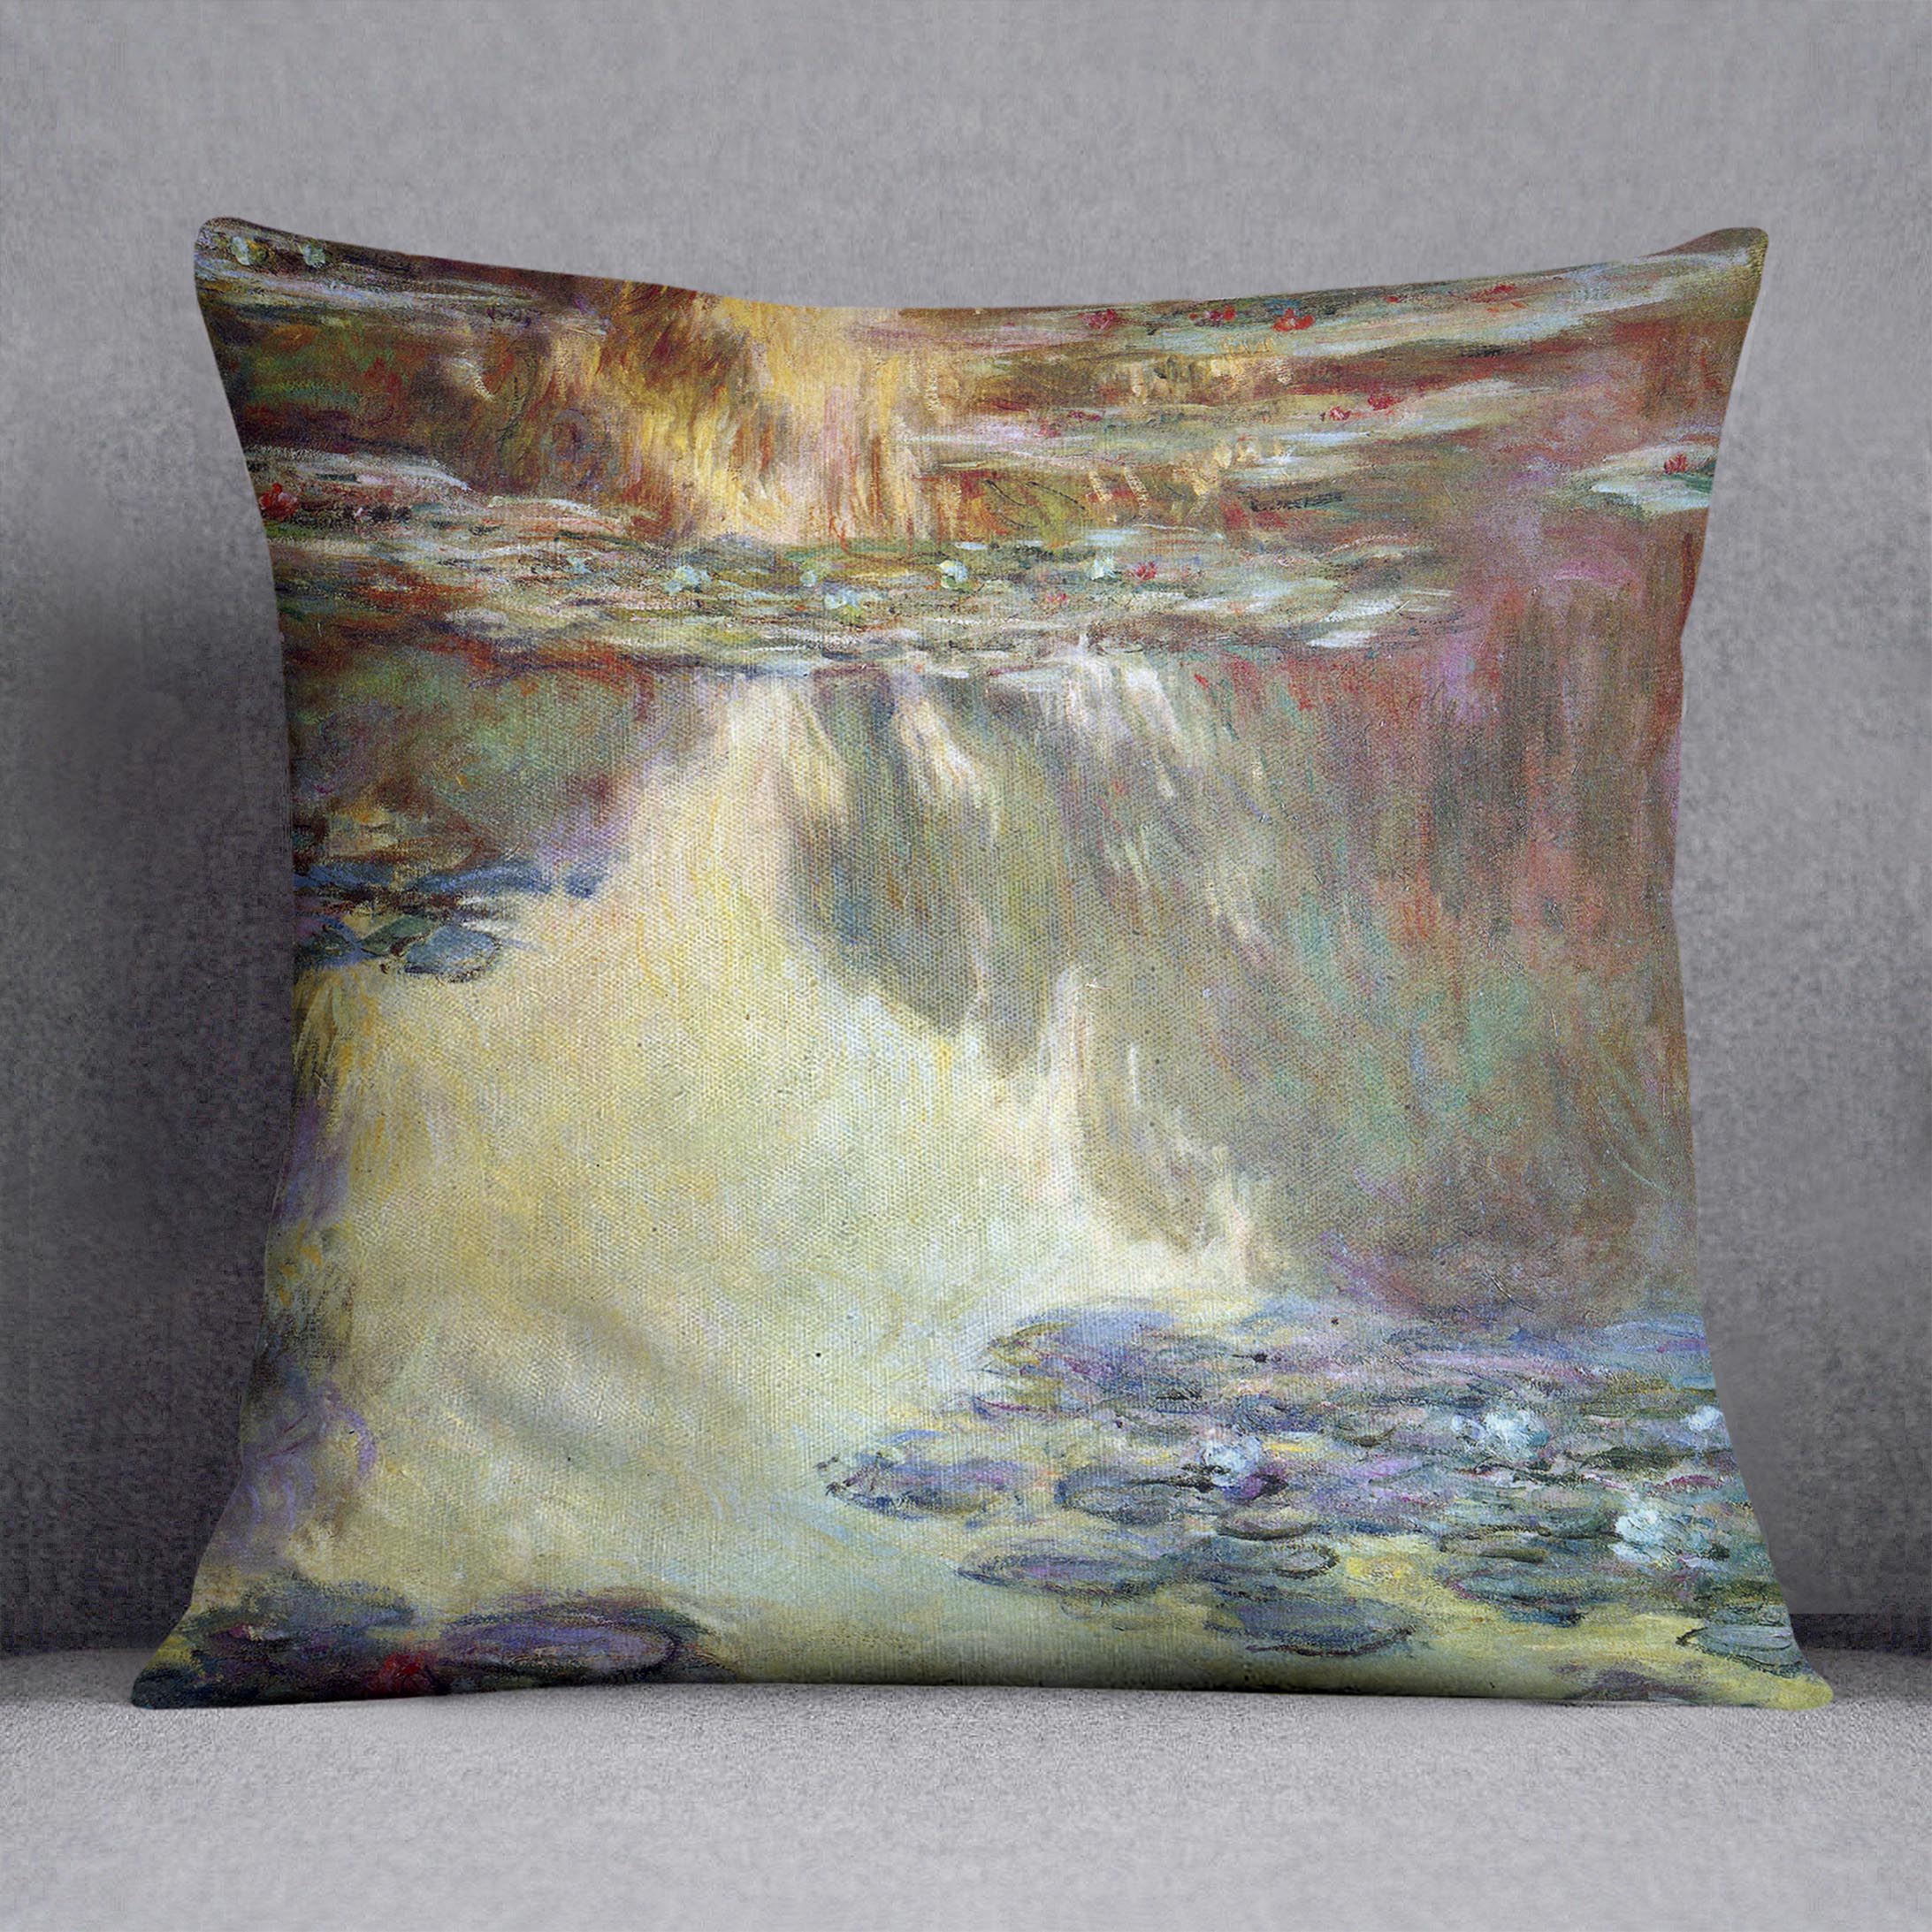 Water lilies water landscape 6 by Monet Cushion